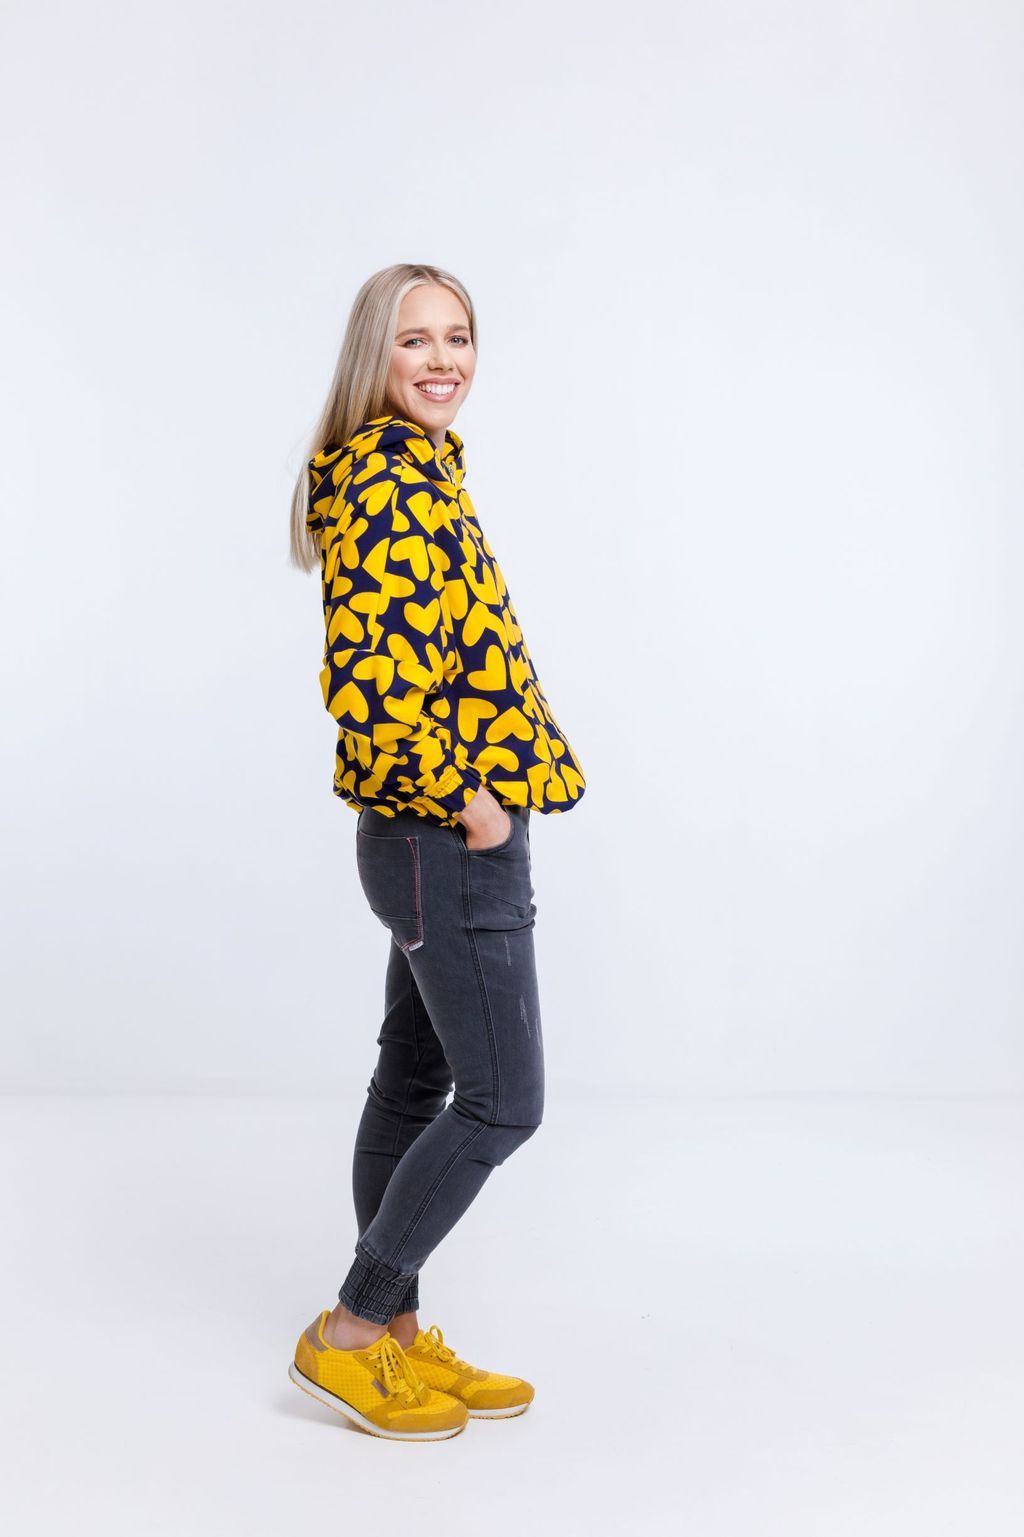 HOME-LEE_EVIE BOMBER BLUE & YELLOW HEART PRINT _ _ Ebony Boutique NZ